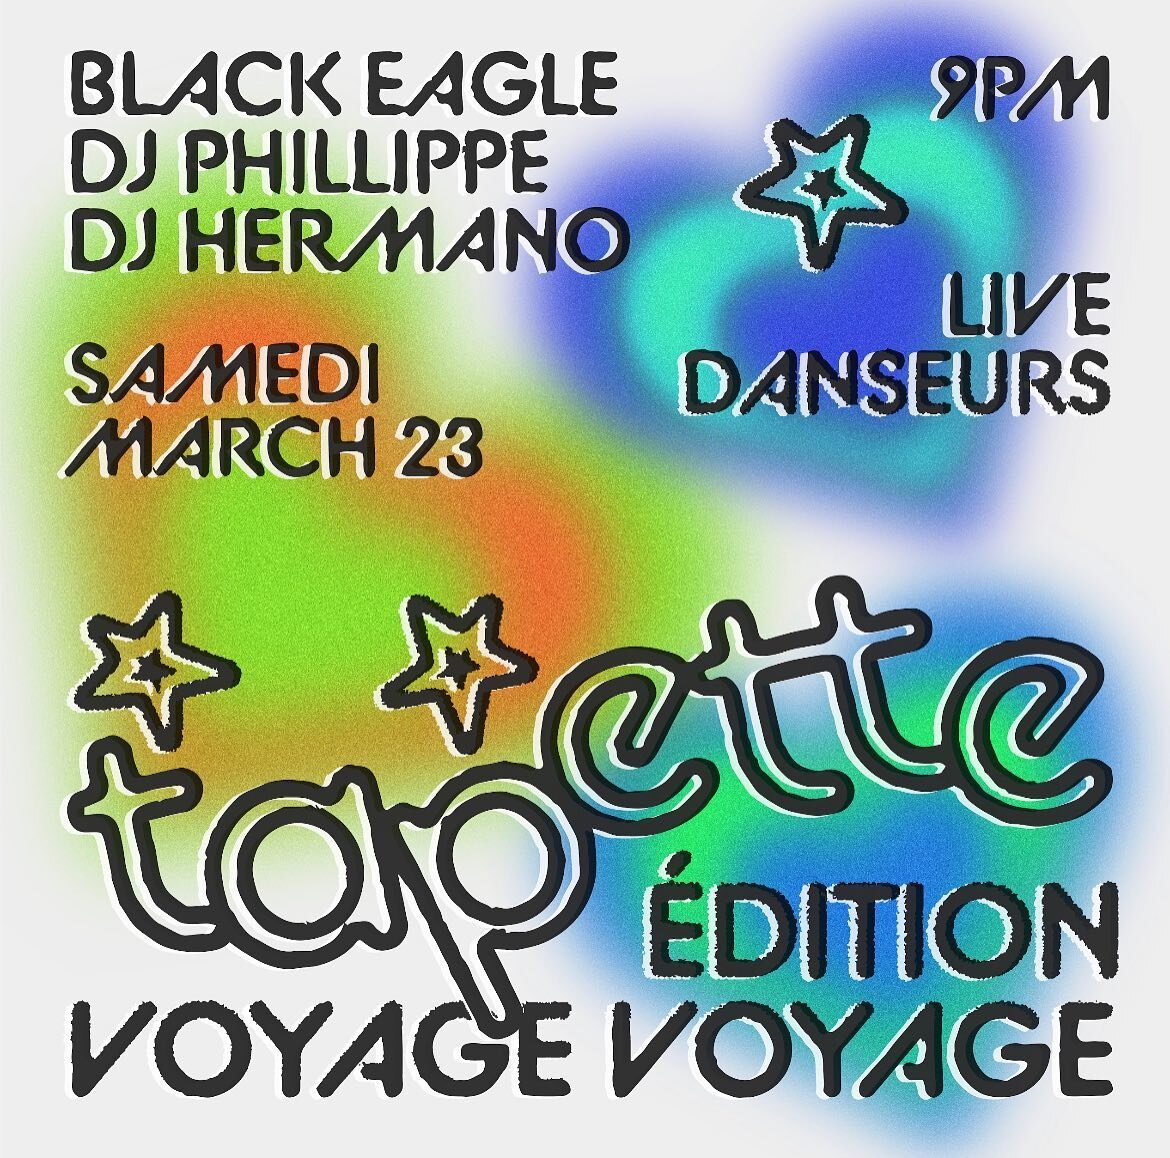 This Saturday! @tapetteparty returns to the black eagle! with @dancingphil and @djhermano_  on the decks, you&rsquo;re gonna be spinning all night longgggg! Party starts at 9PM!